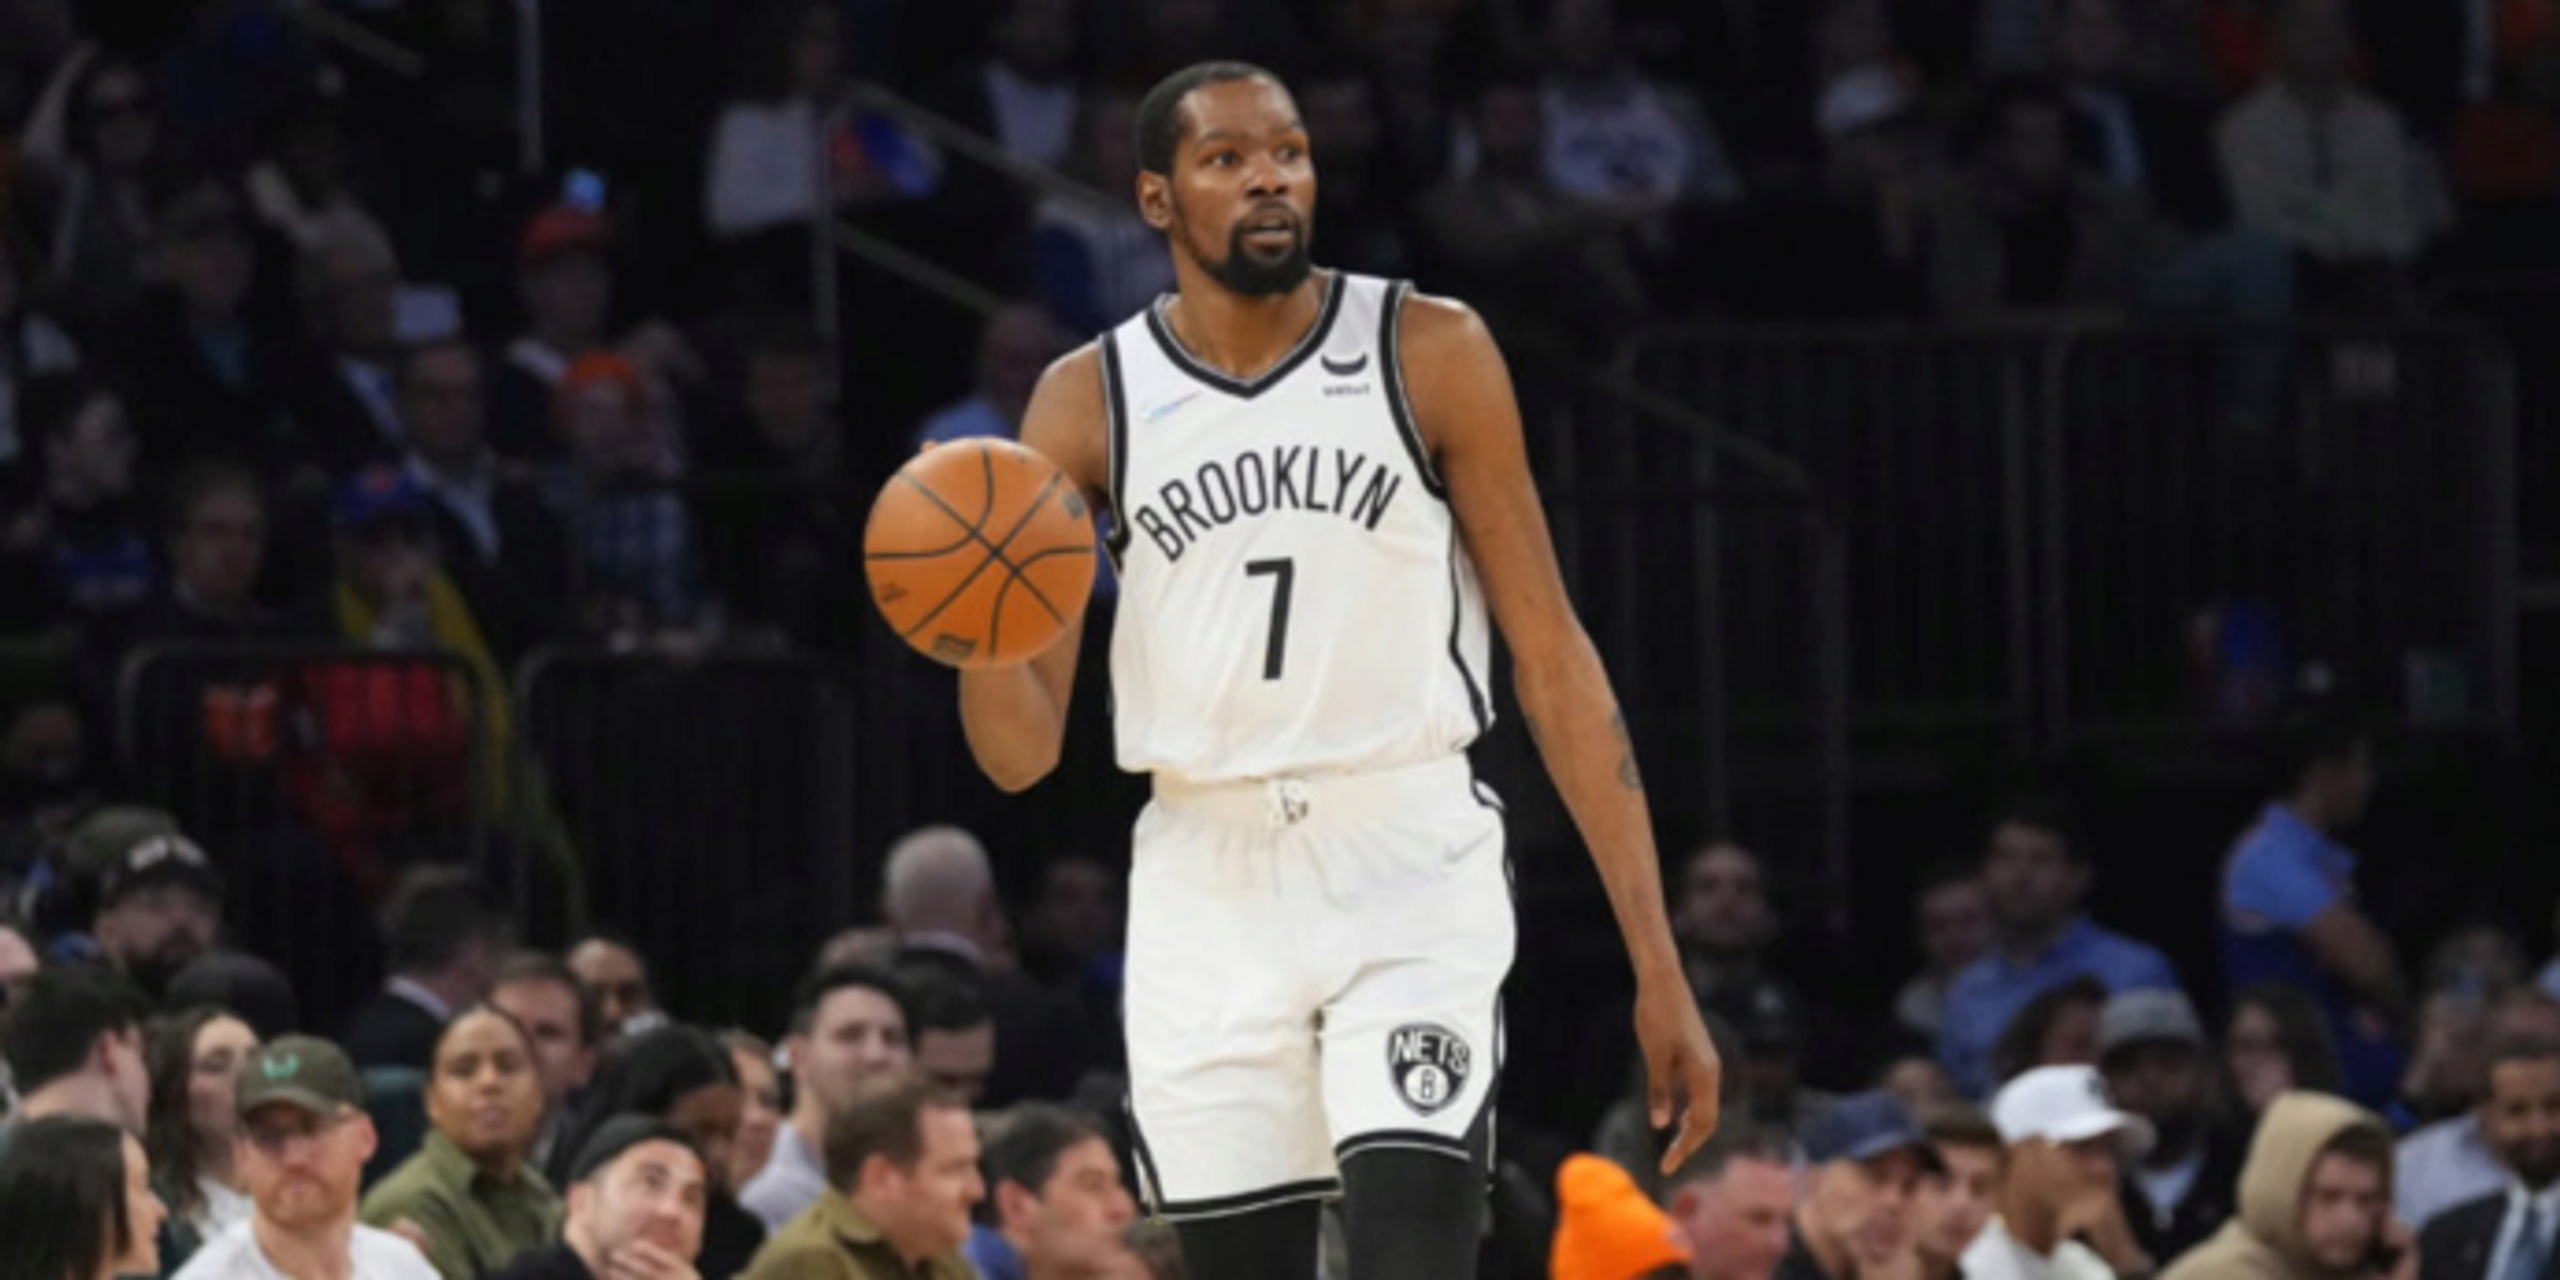 Durant leads big rally at MSG as Nets storm past Knicks